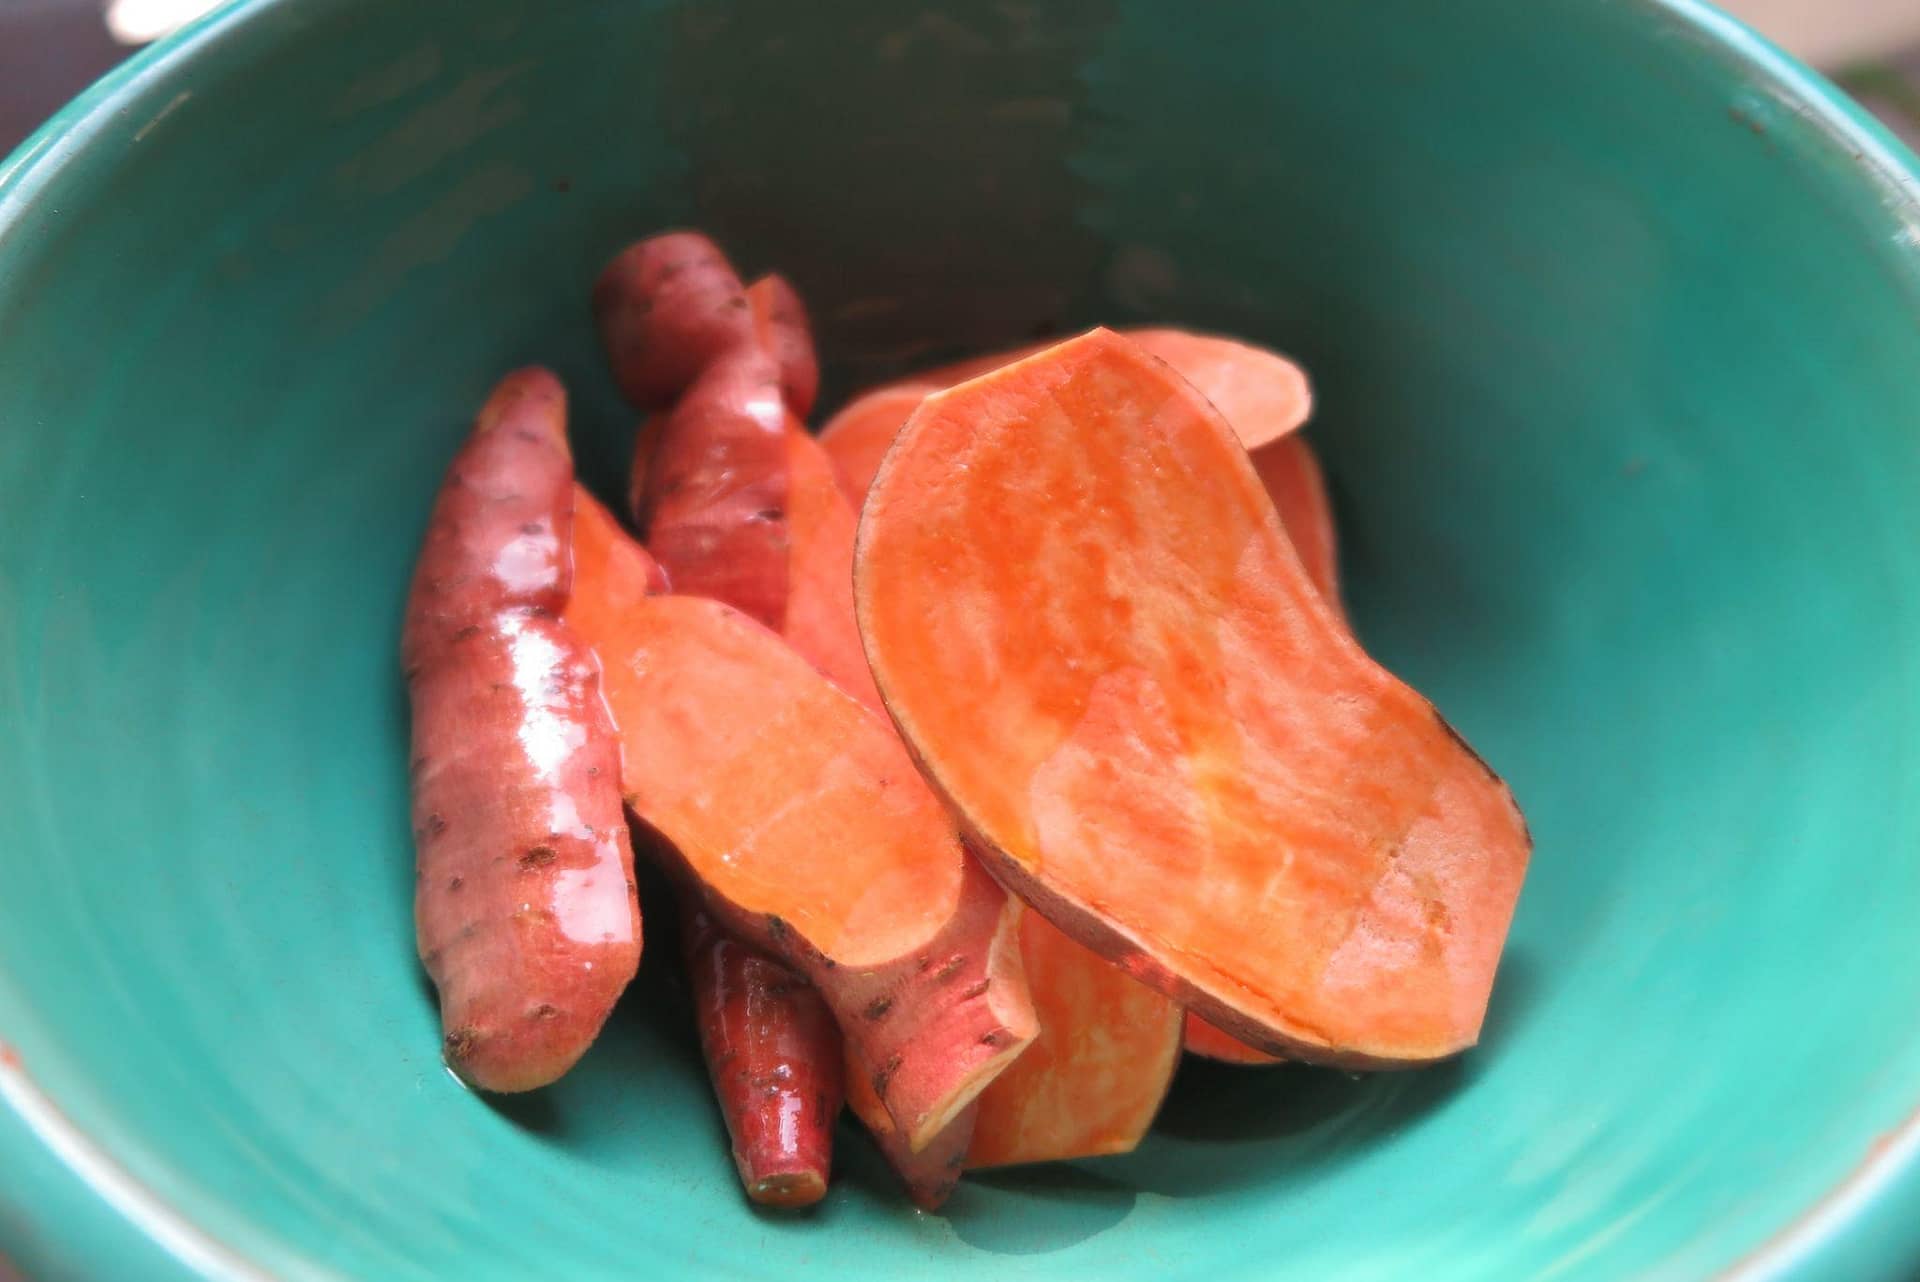 Sliced sweet potatoes in a teal bowl